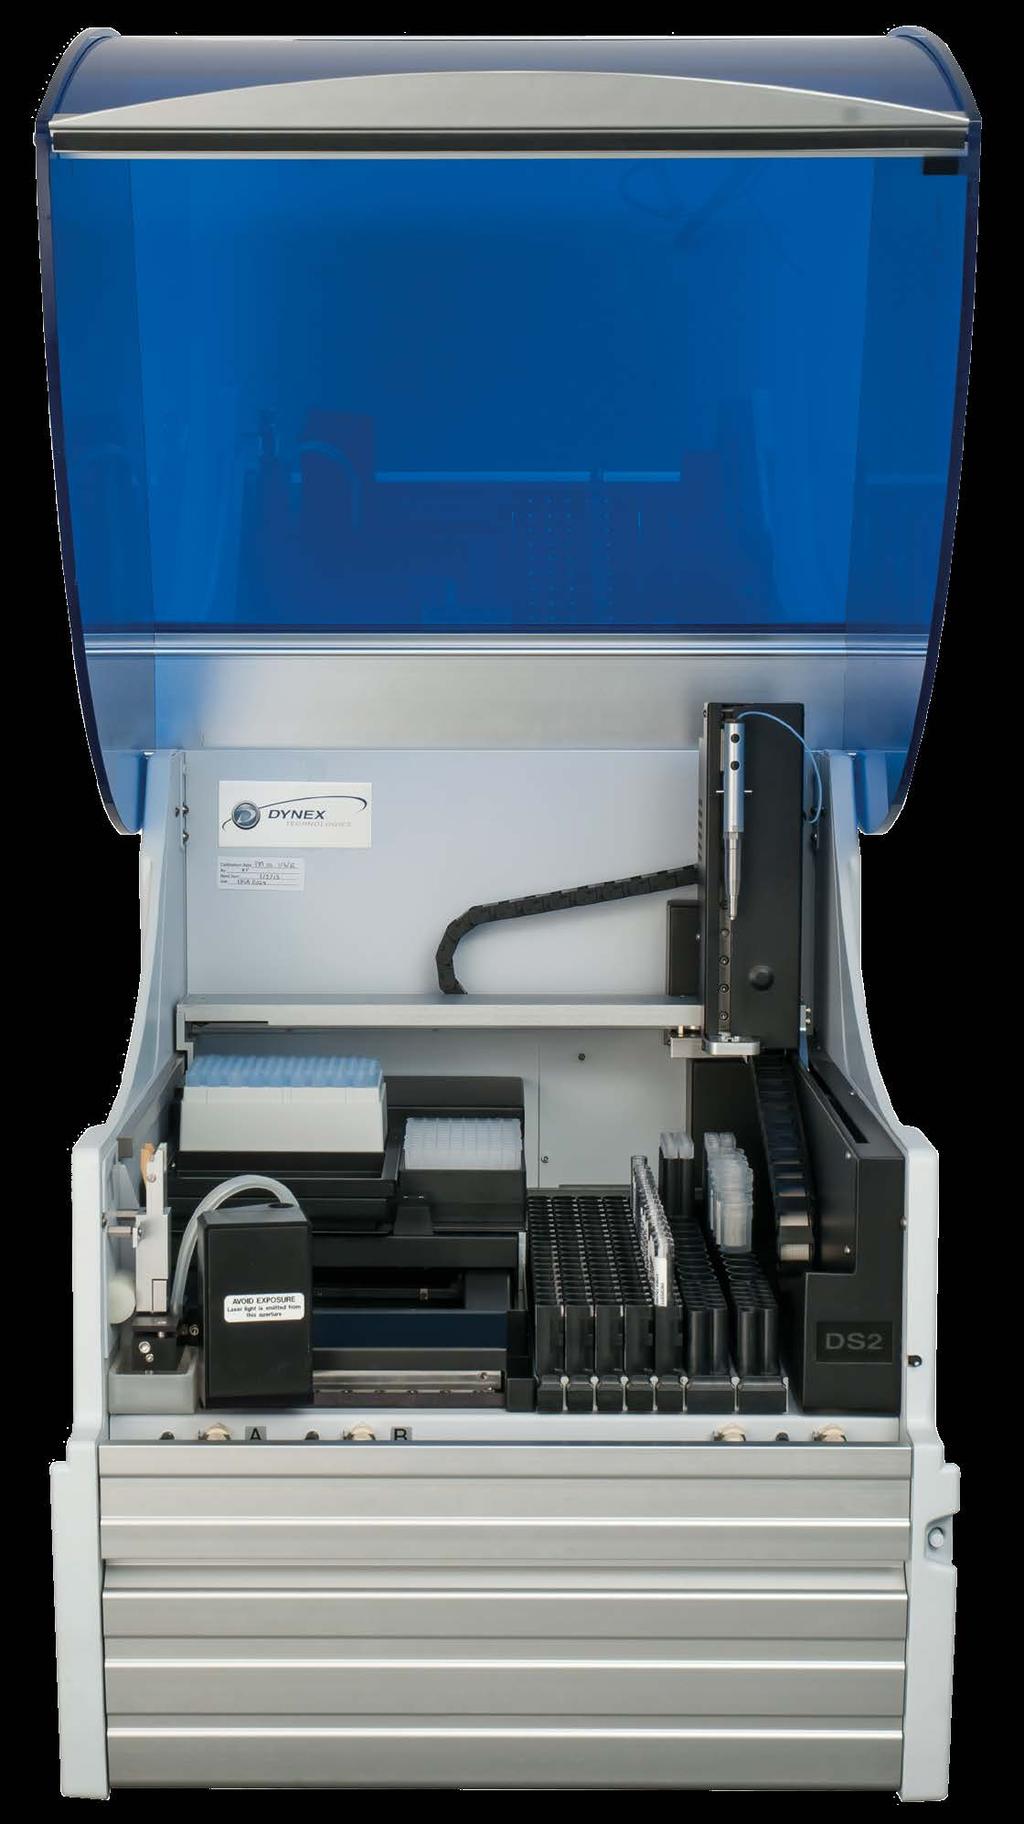 Dynex DS2 2-Plate ELISA Processing System